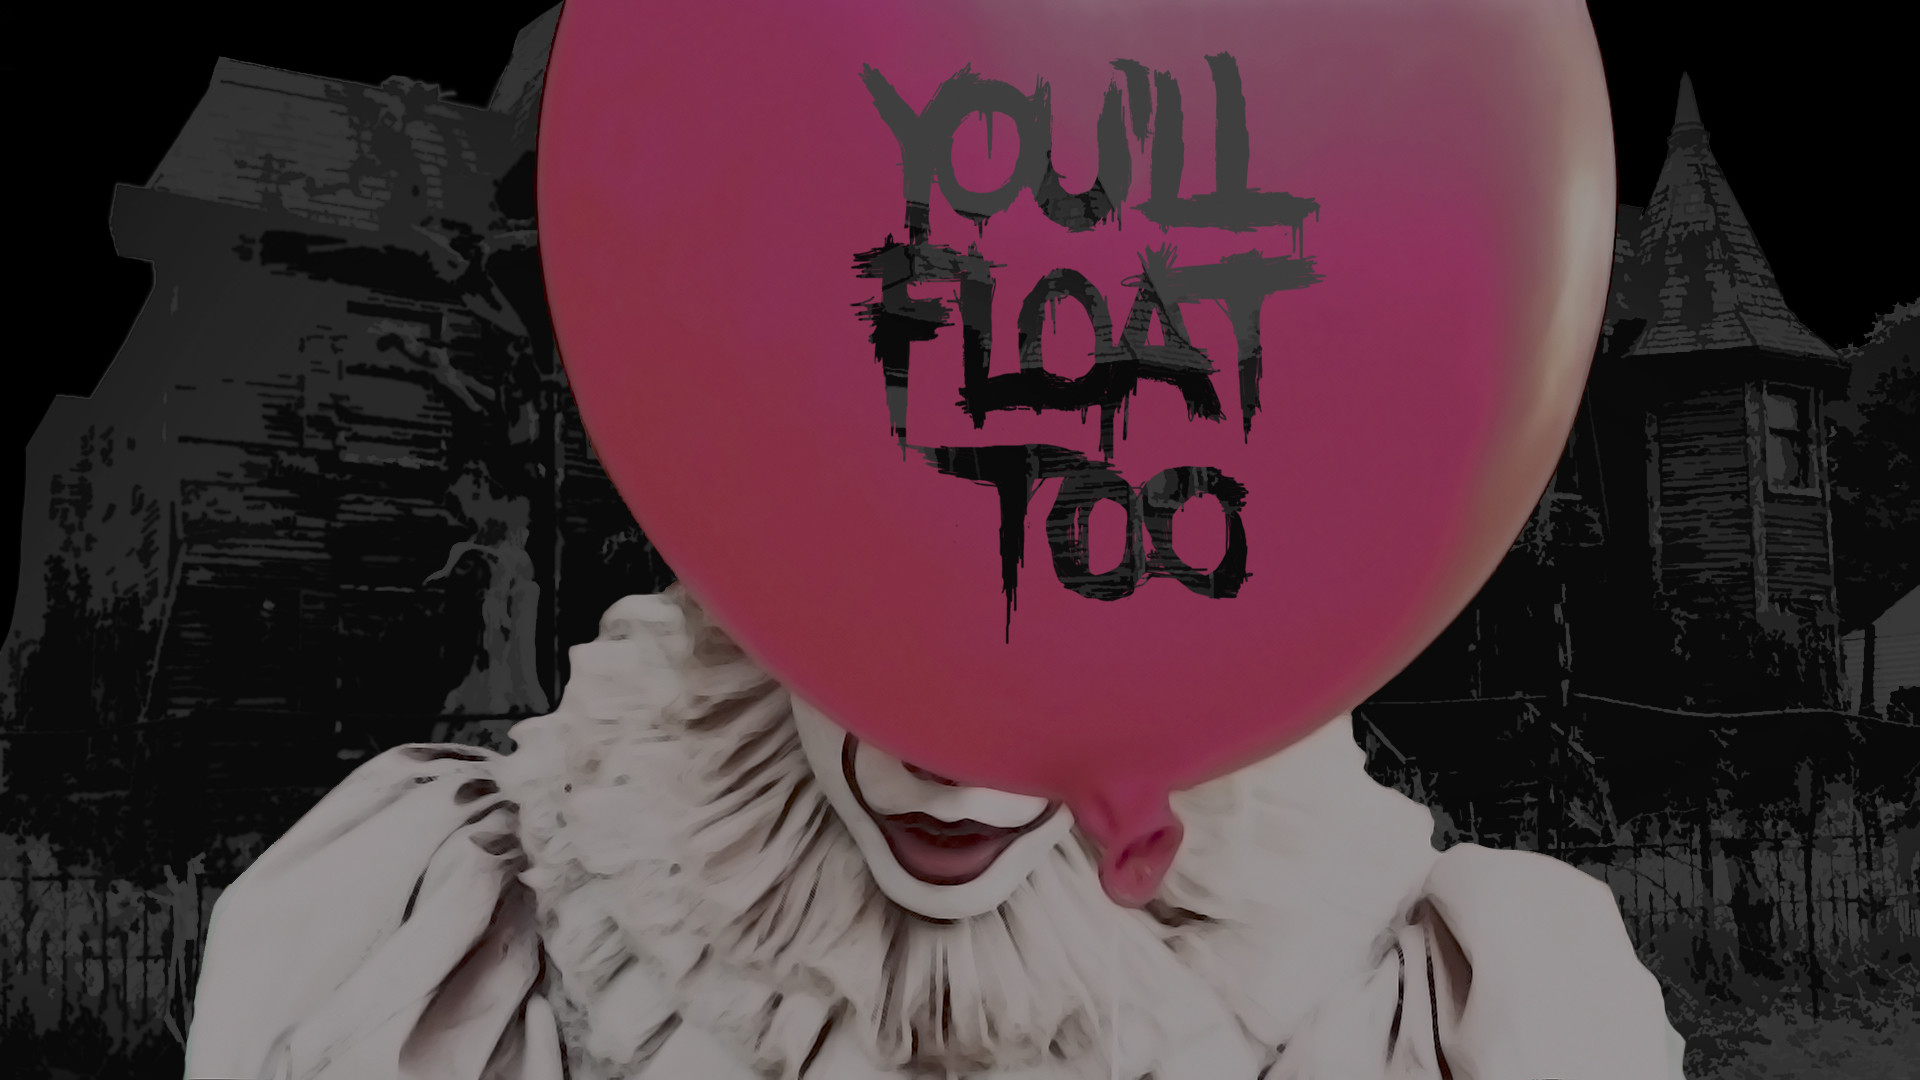 1920x1080 General  pennywise it movie you will float too clowns